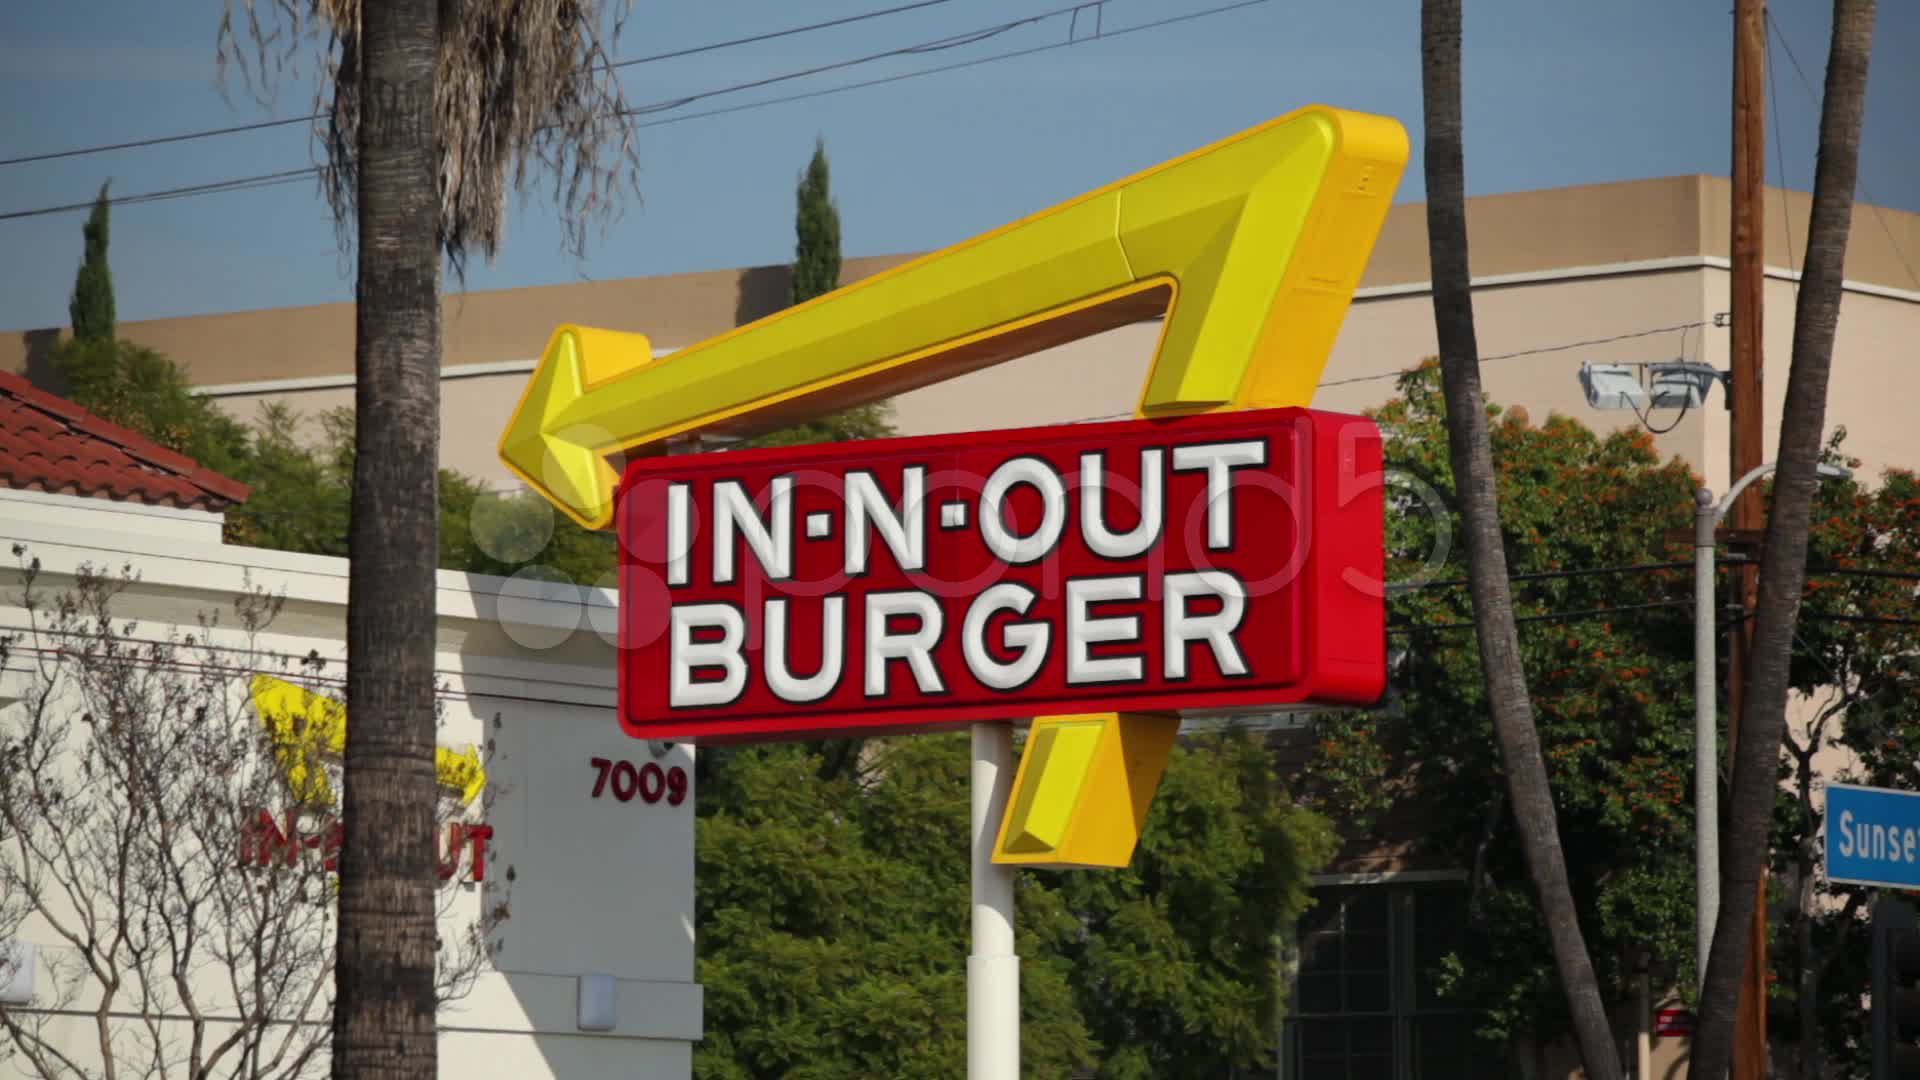 In-n-out Burger - HD Wallpaper 